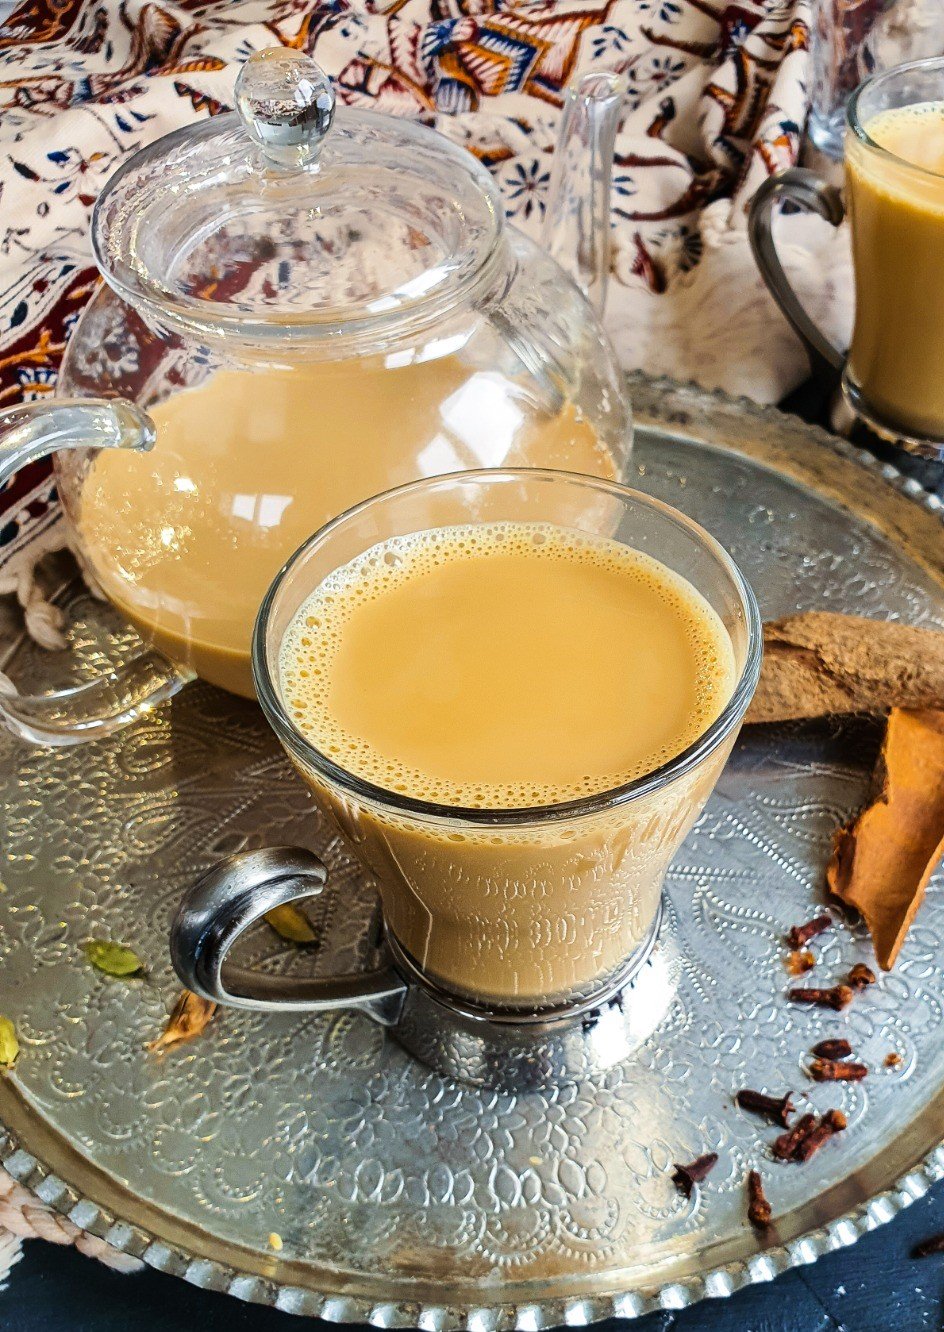 A deliciously warm tea for your family and friends that combines perfectly with your filling dinner or tasty dessert.